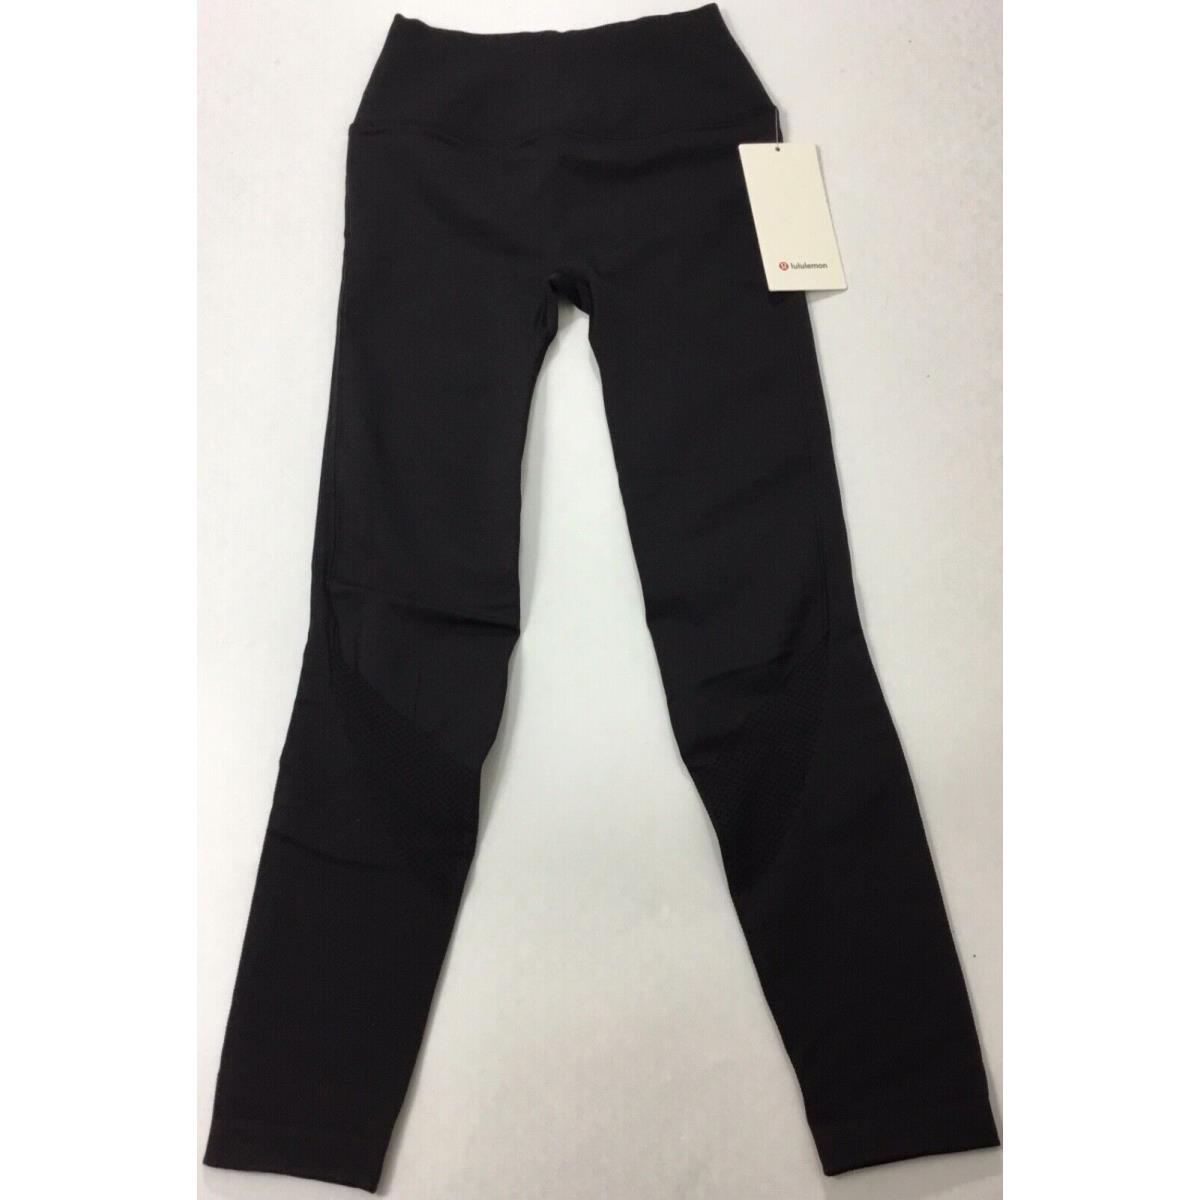 Lululemon Women For The Chill of It Seamless Tight 25 LW5BPOS Black Size 4